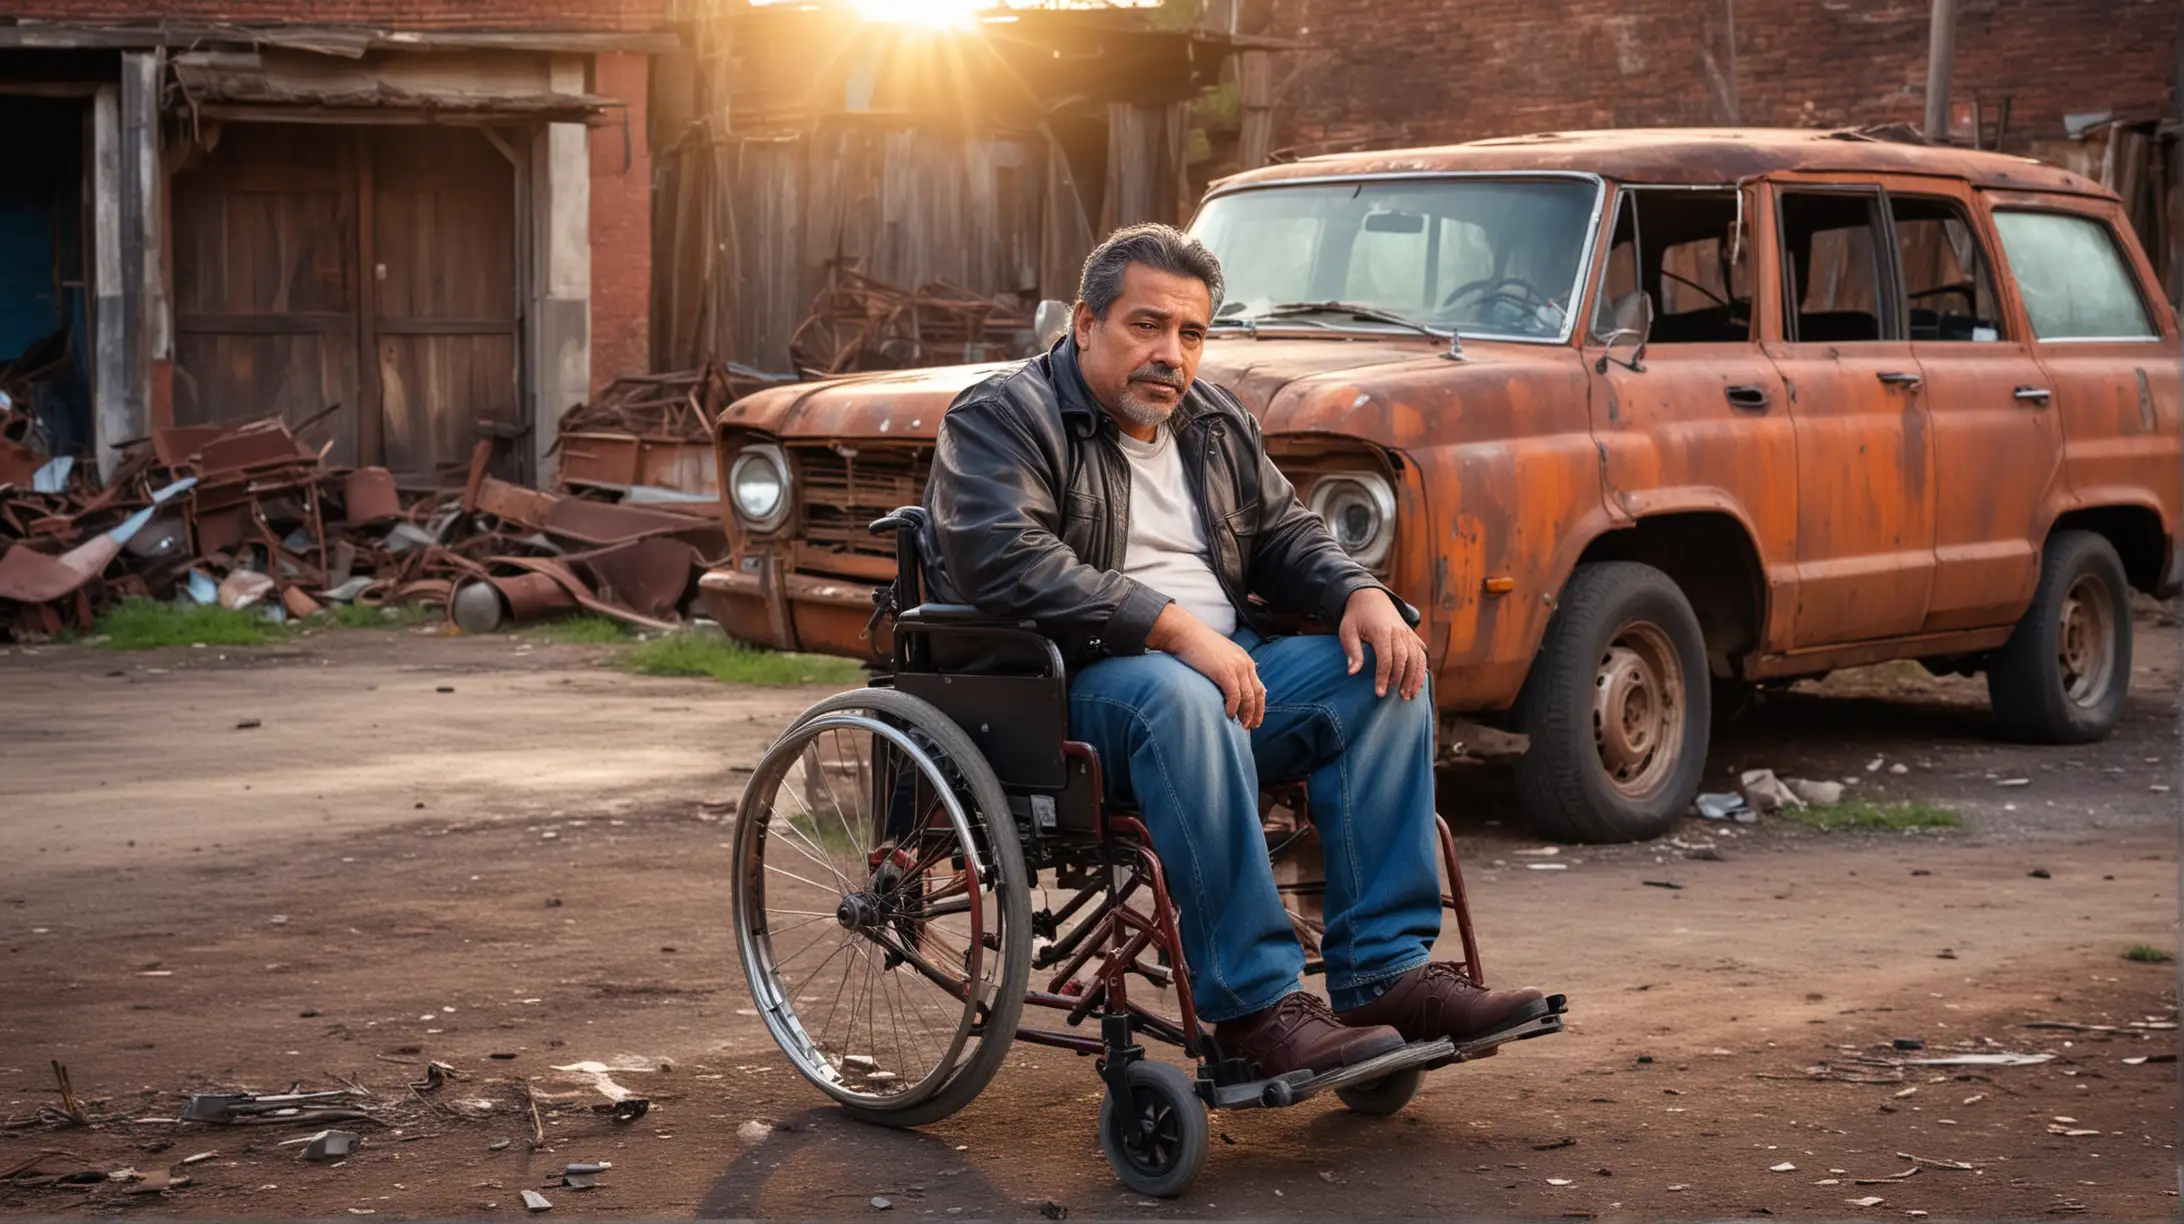 Hispanic Man in Wheelchair by Rusty Car Dramatic Scene with Vibrant Colors